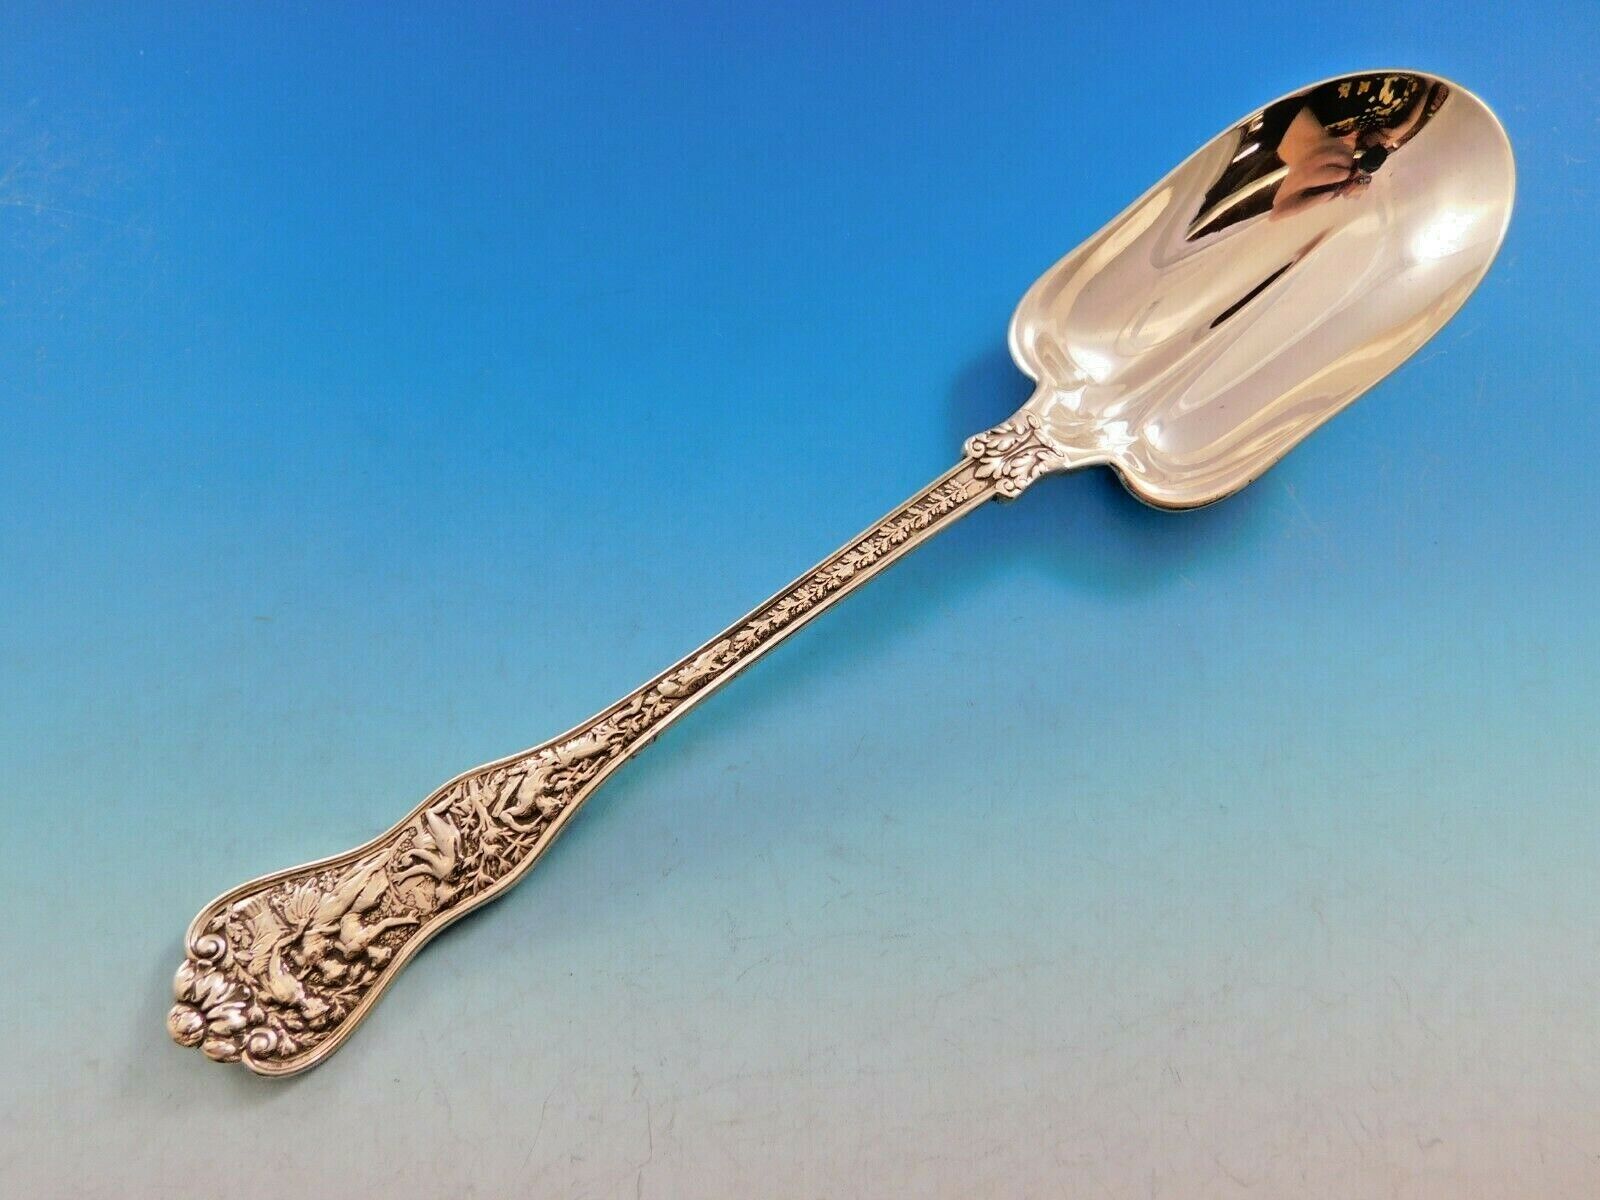 Olympian by Tiffany and Co Sterling Silver Salad Serving Spoon 9 5/8" Vintage